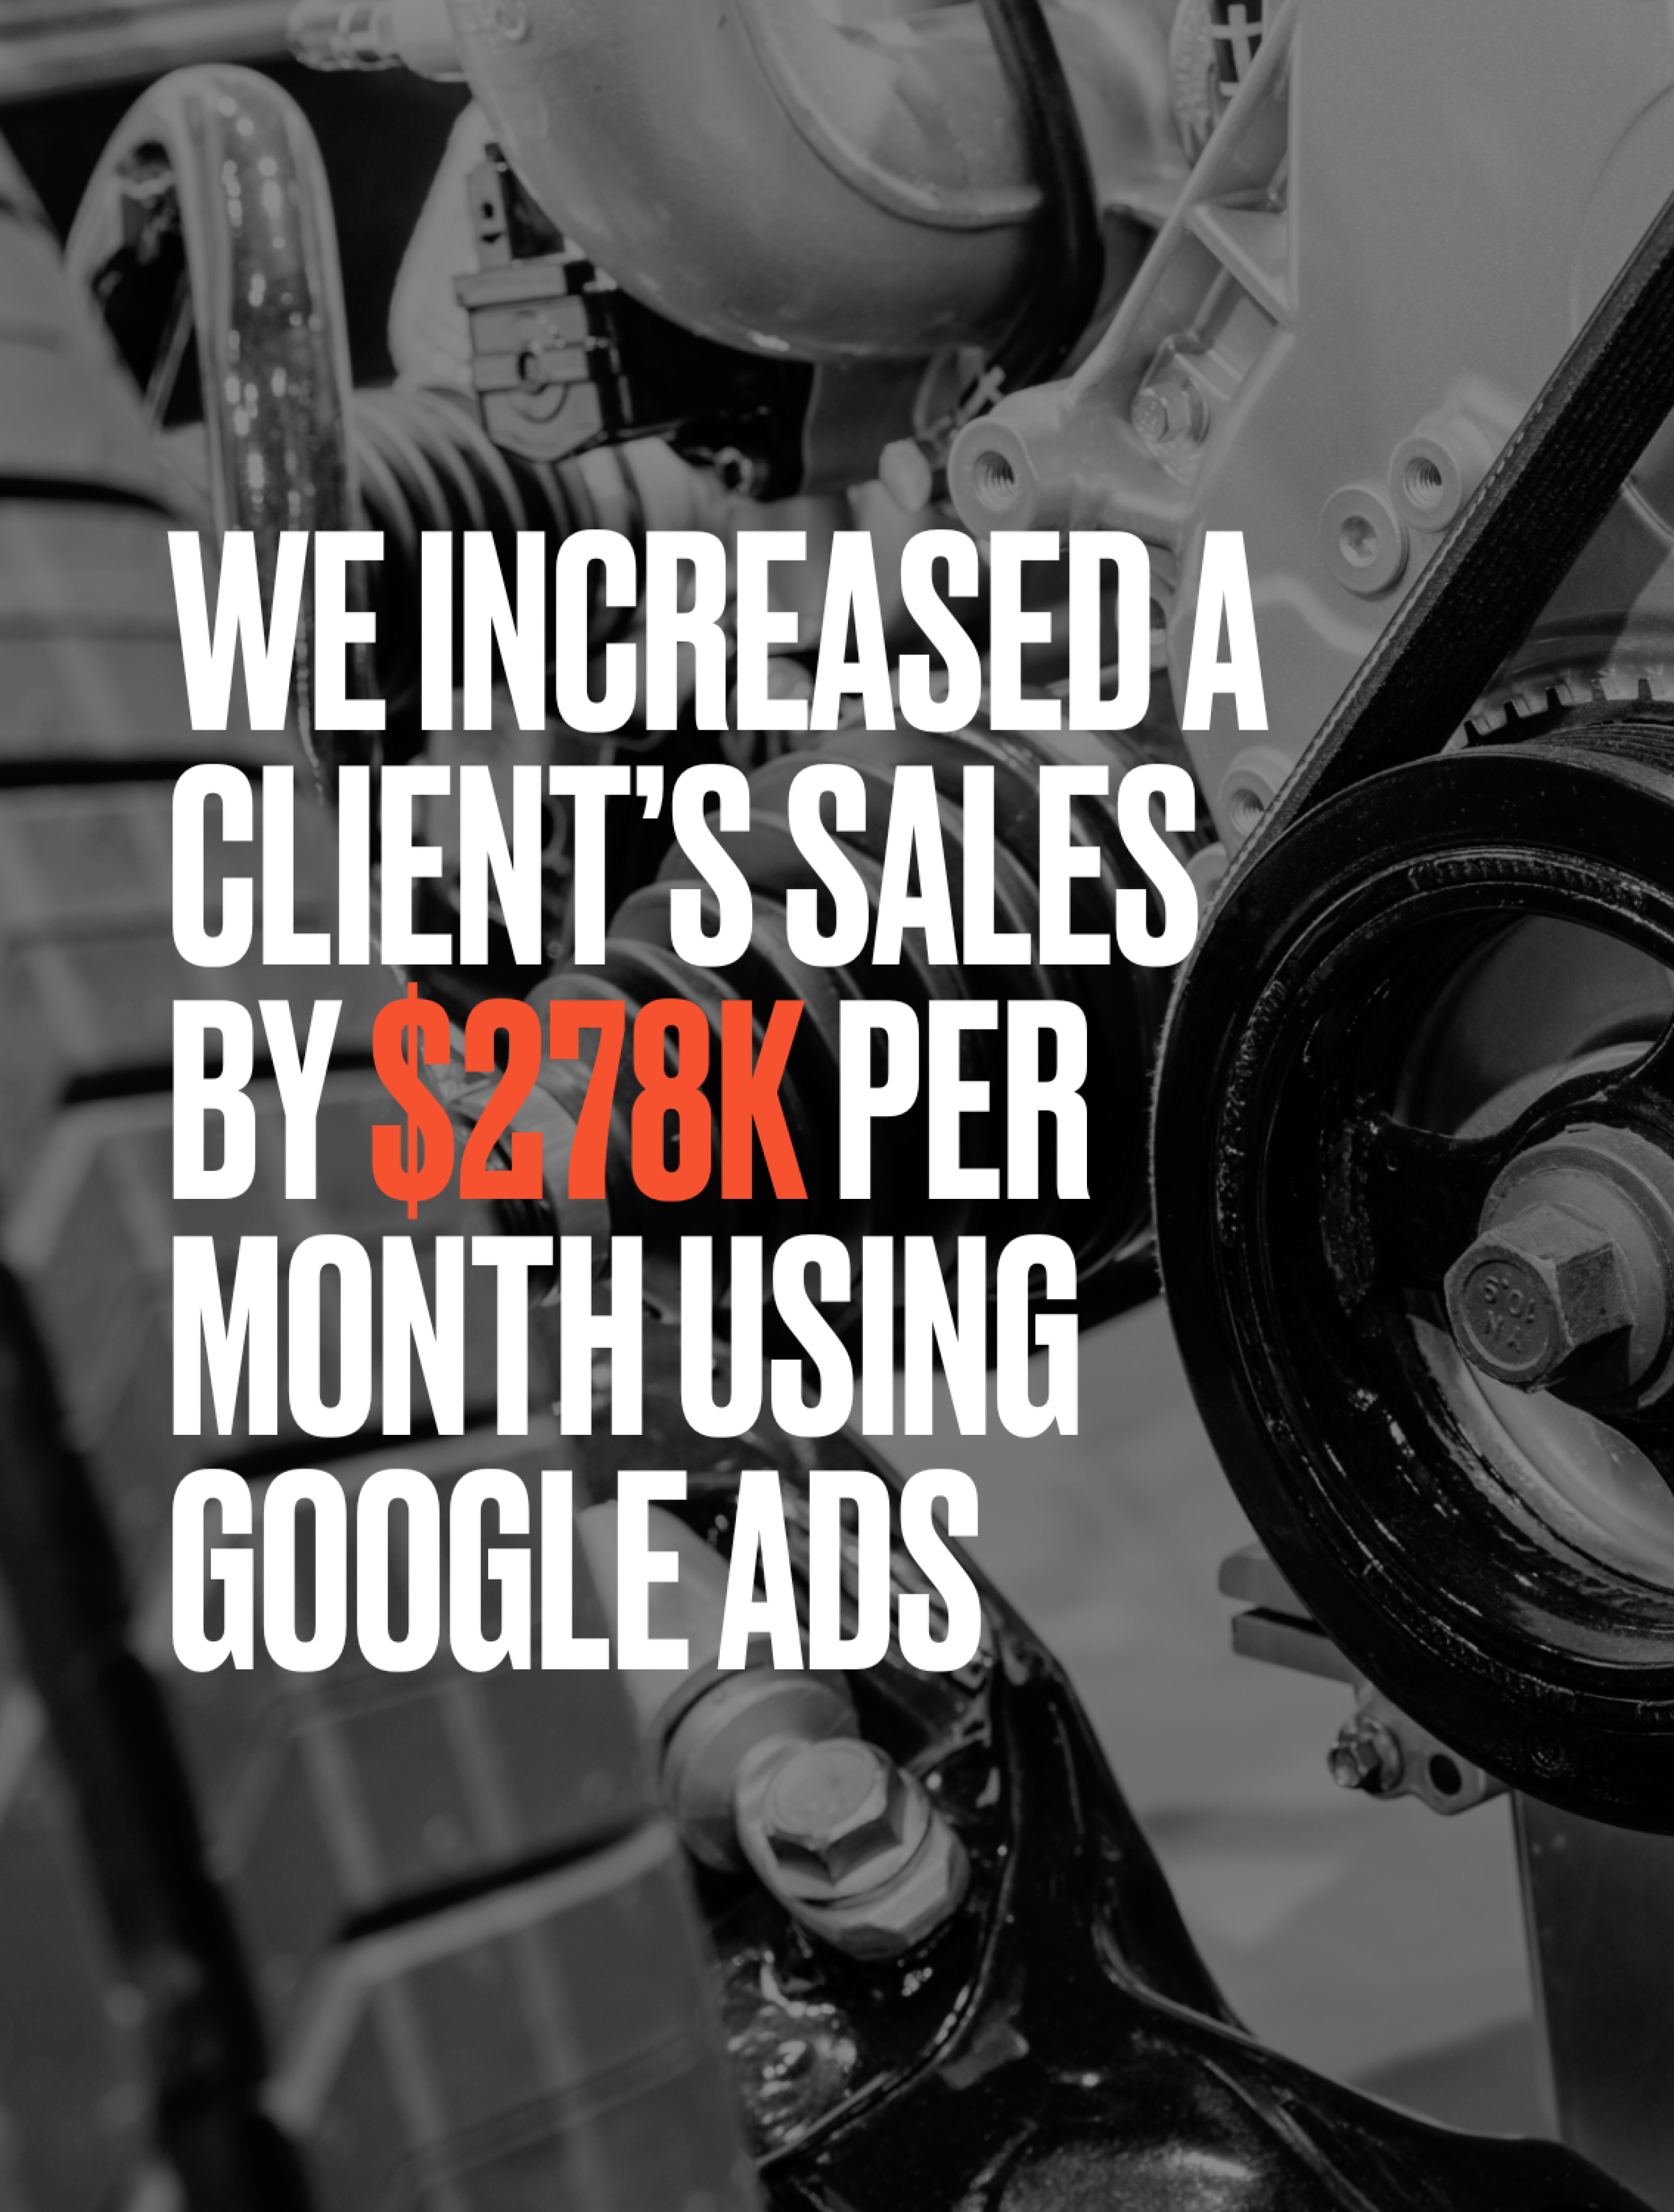 Google ads for automotive industry